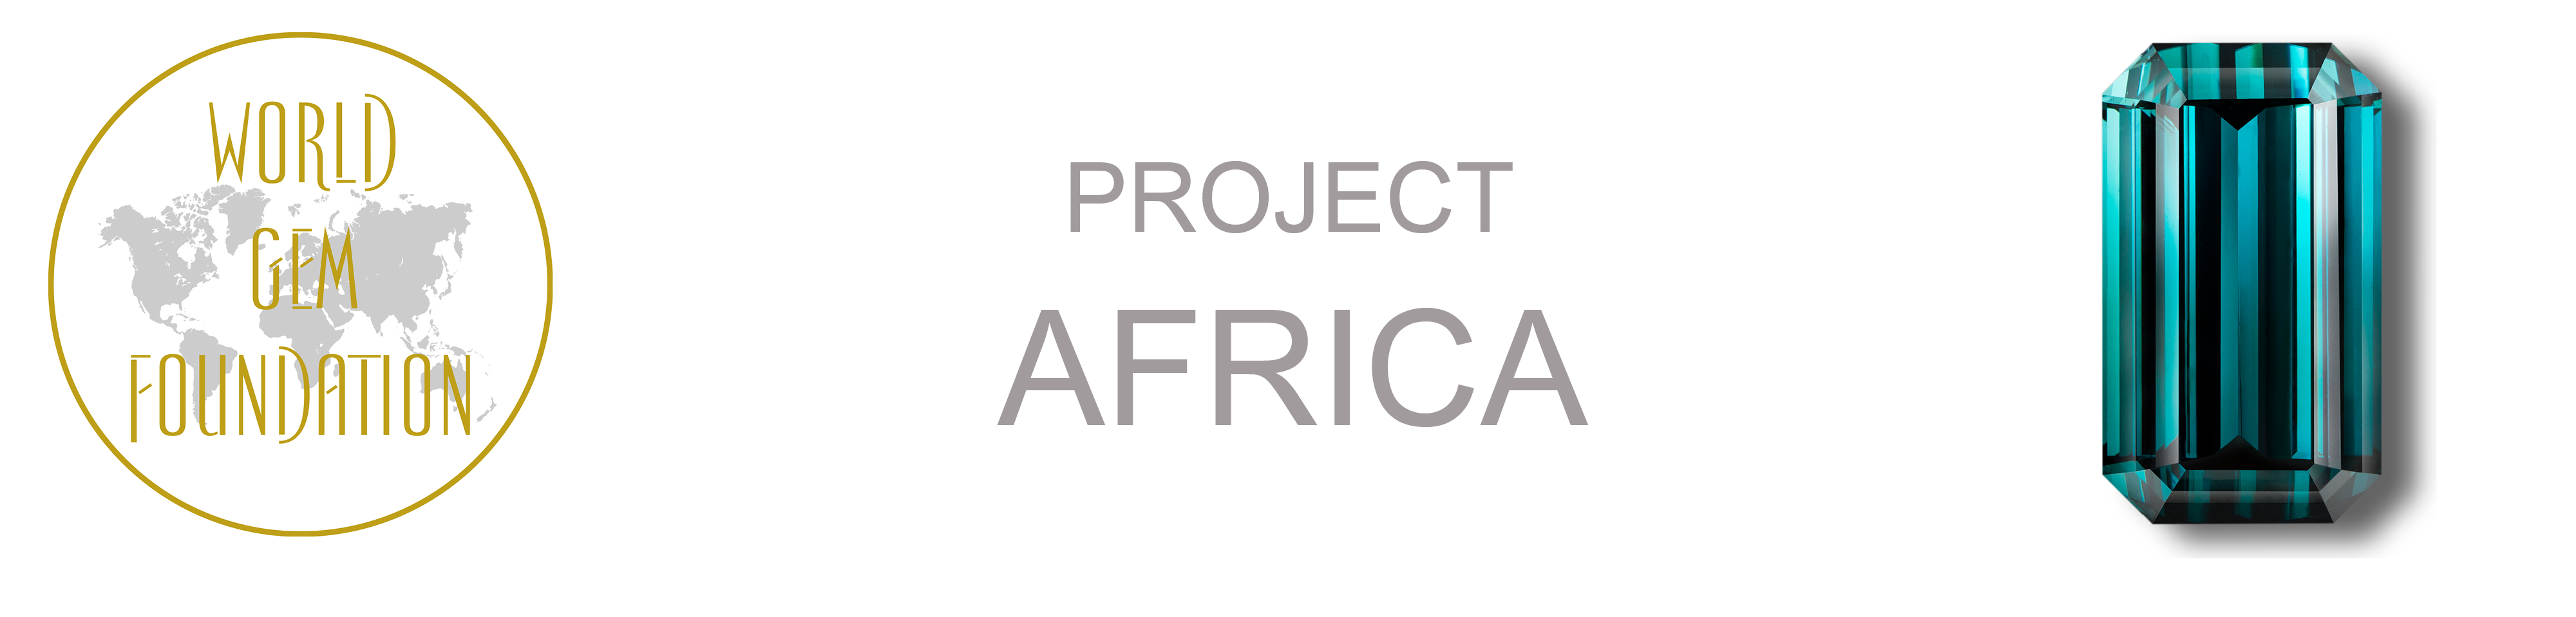 Project Africa